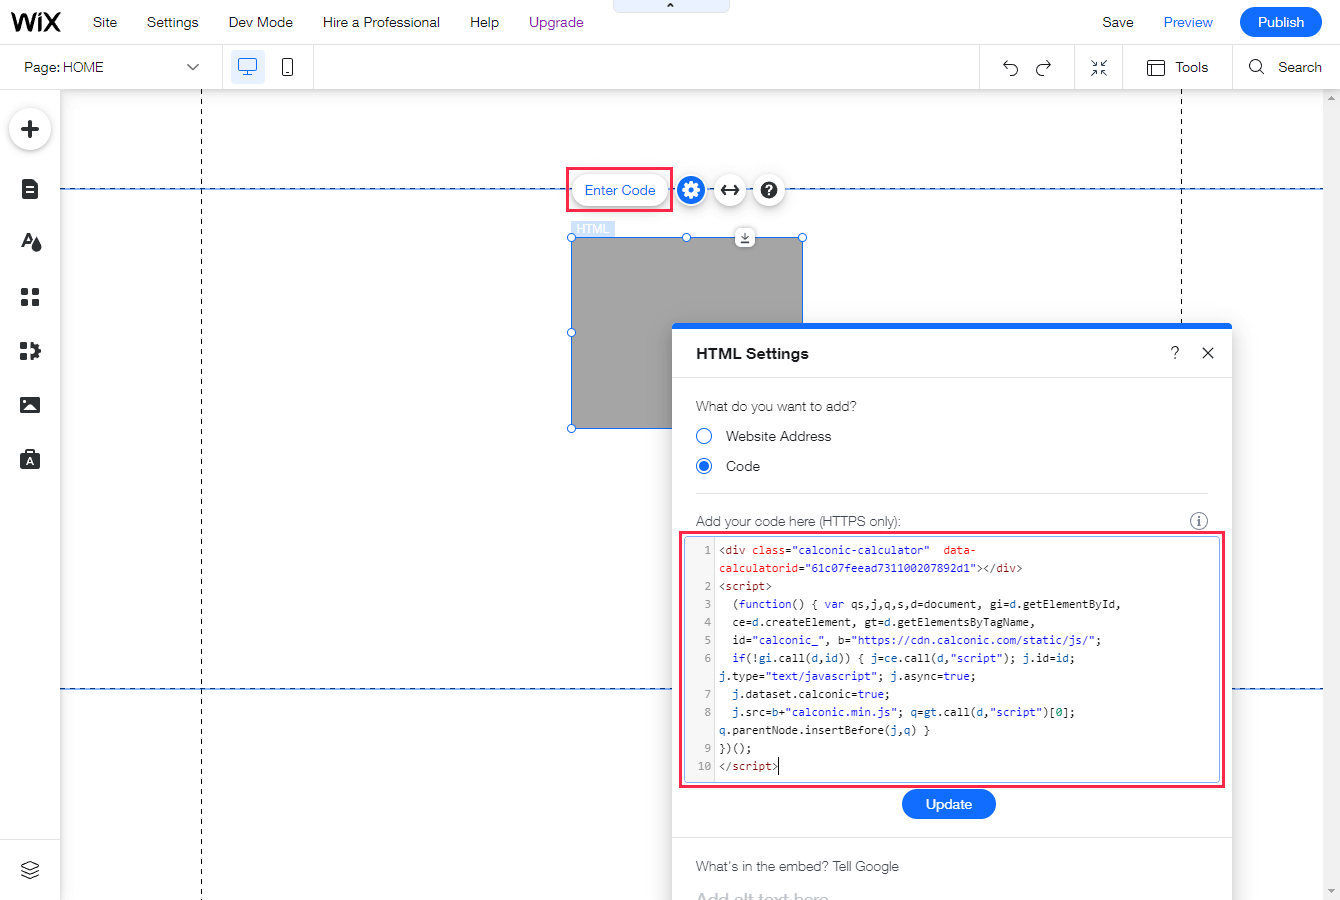 Paste your code snippet